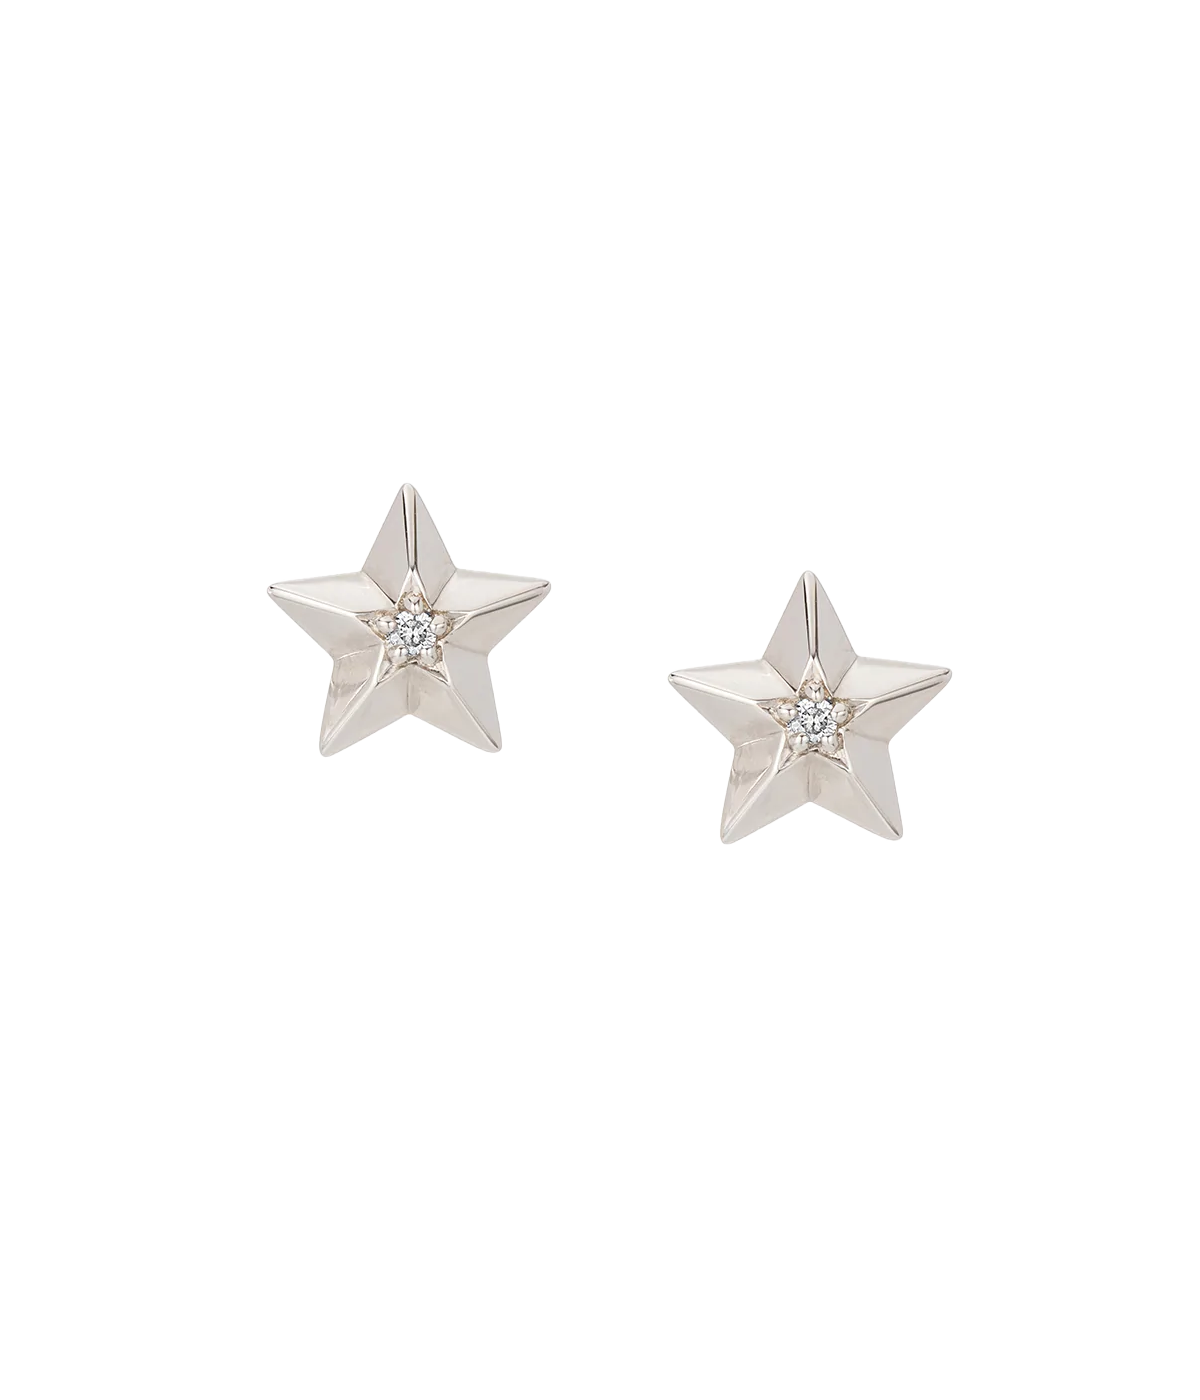 3D Diamond Star Posts in Sterling Silver